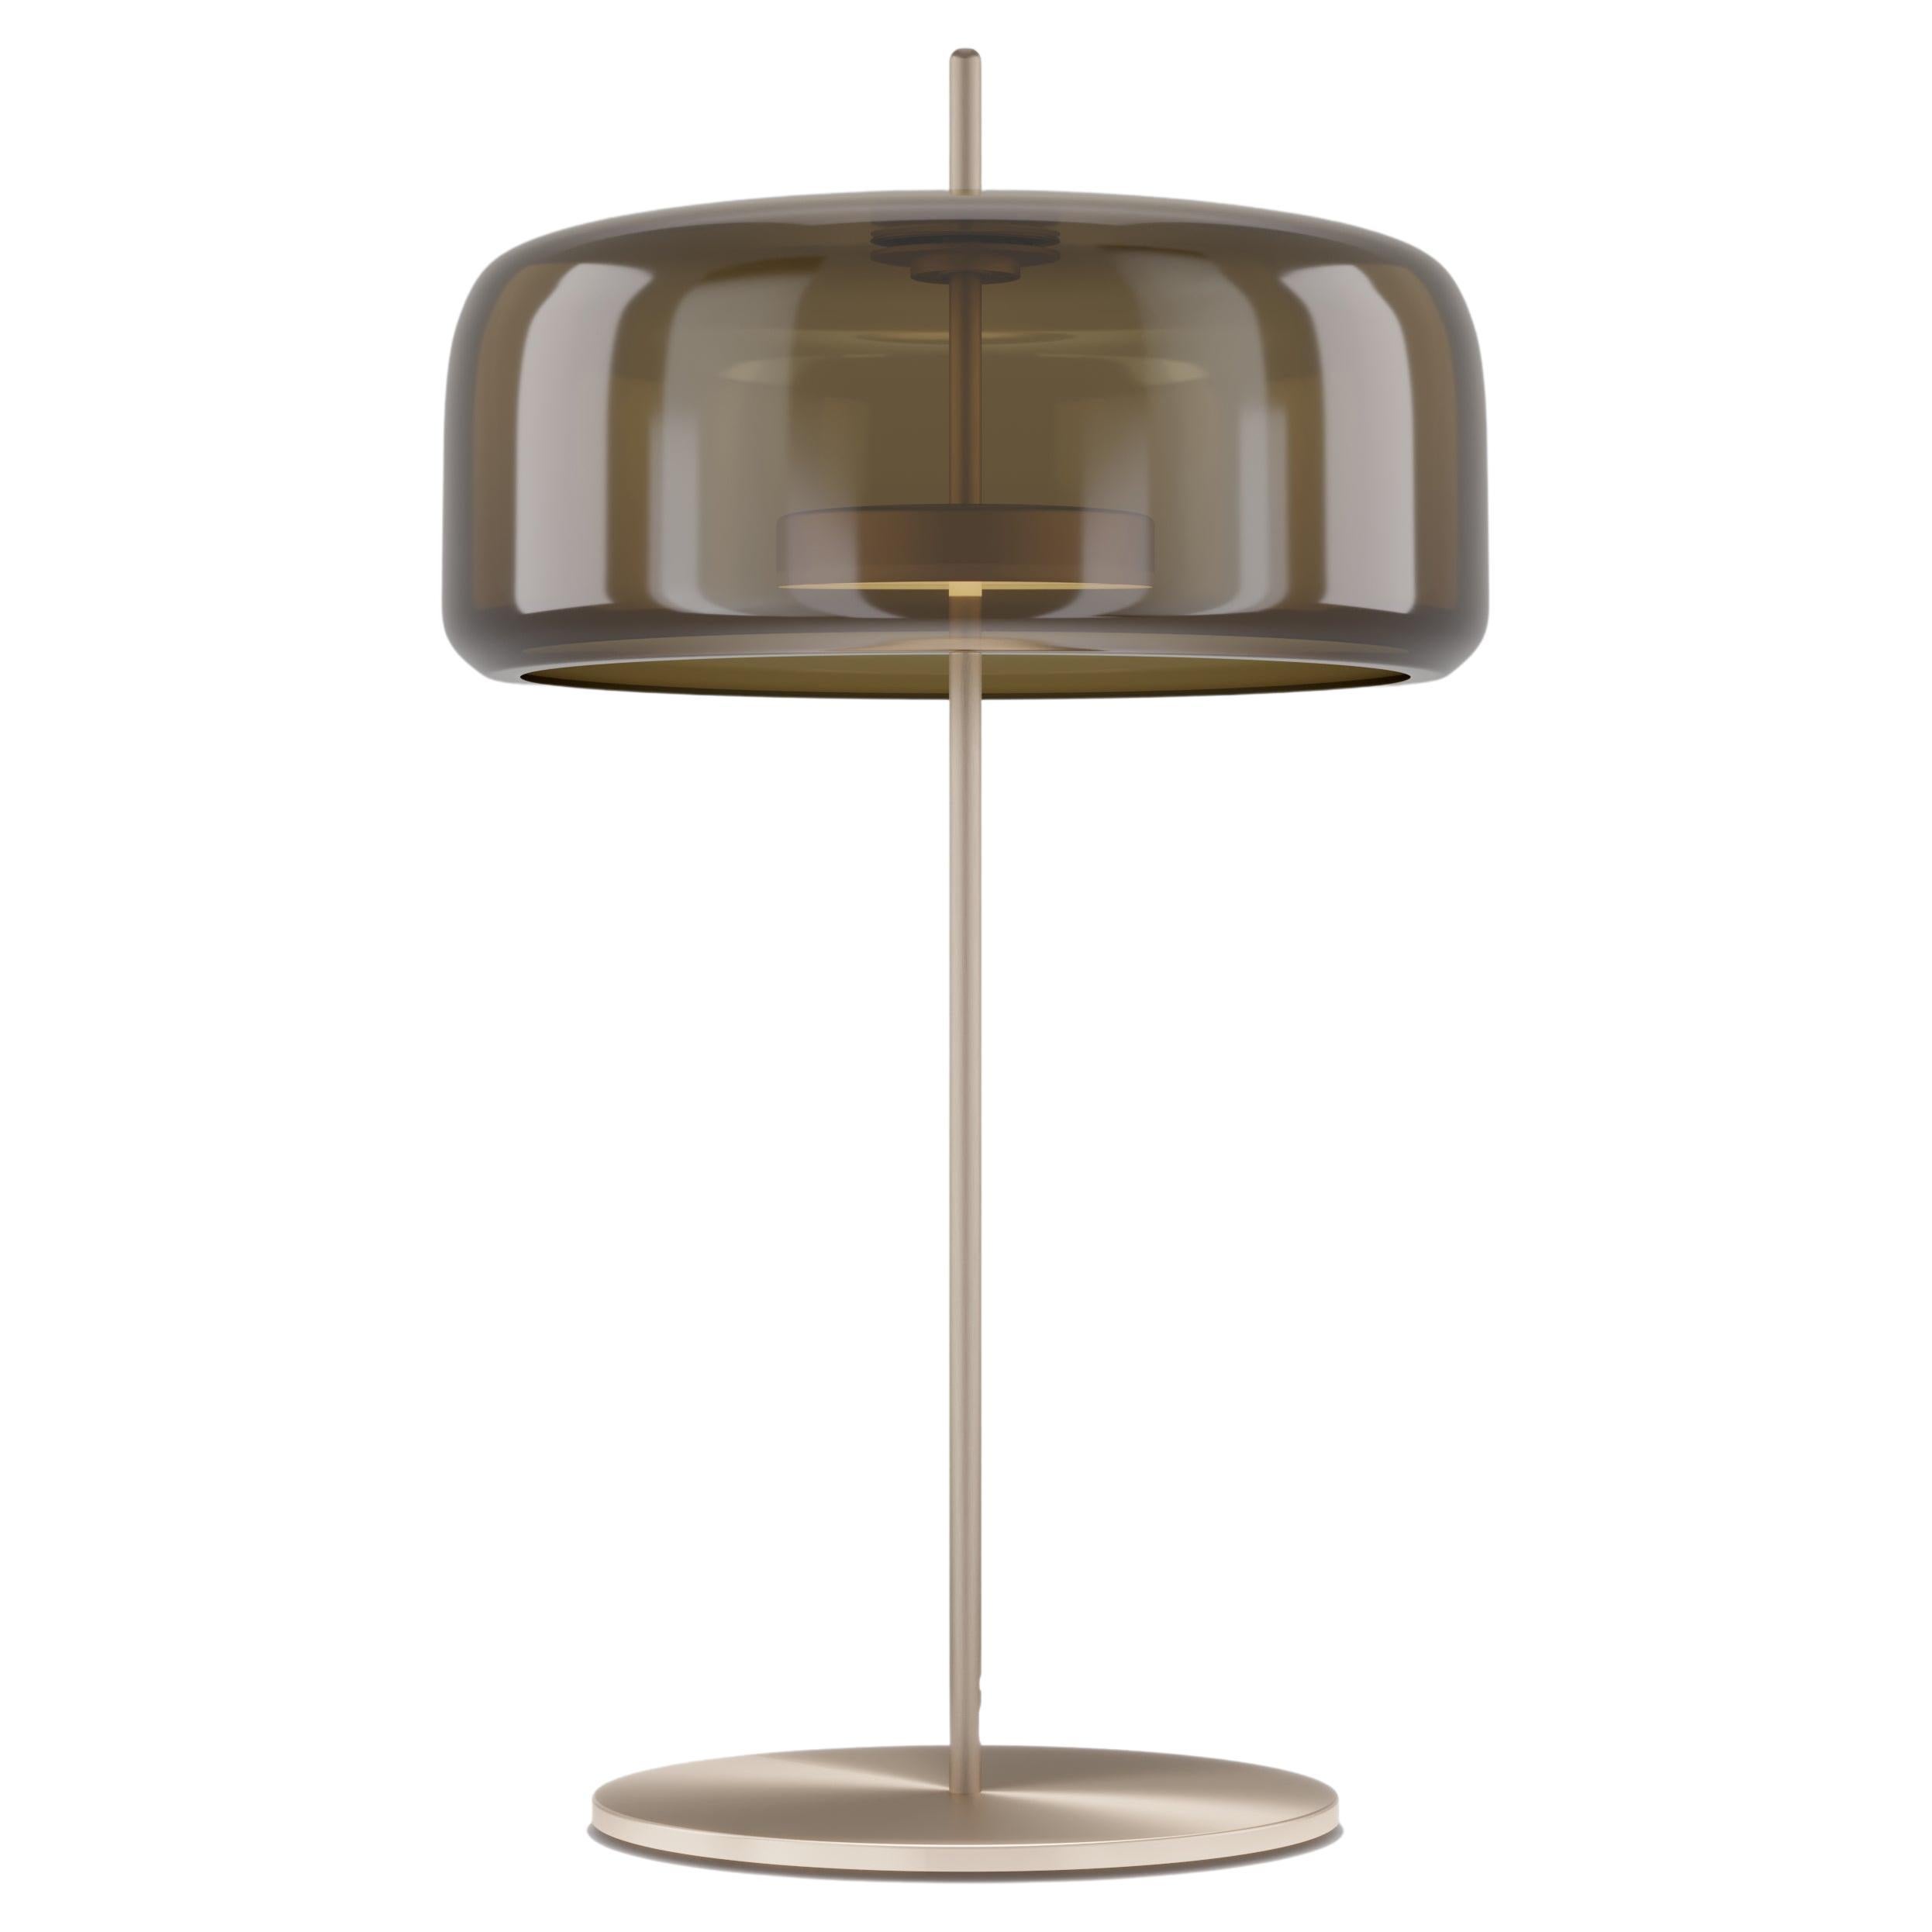 Vistosi Jube Table Lamp in Burned Earth Transparent Glass And Matt Gold Finish For Sale